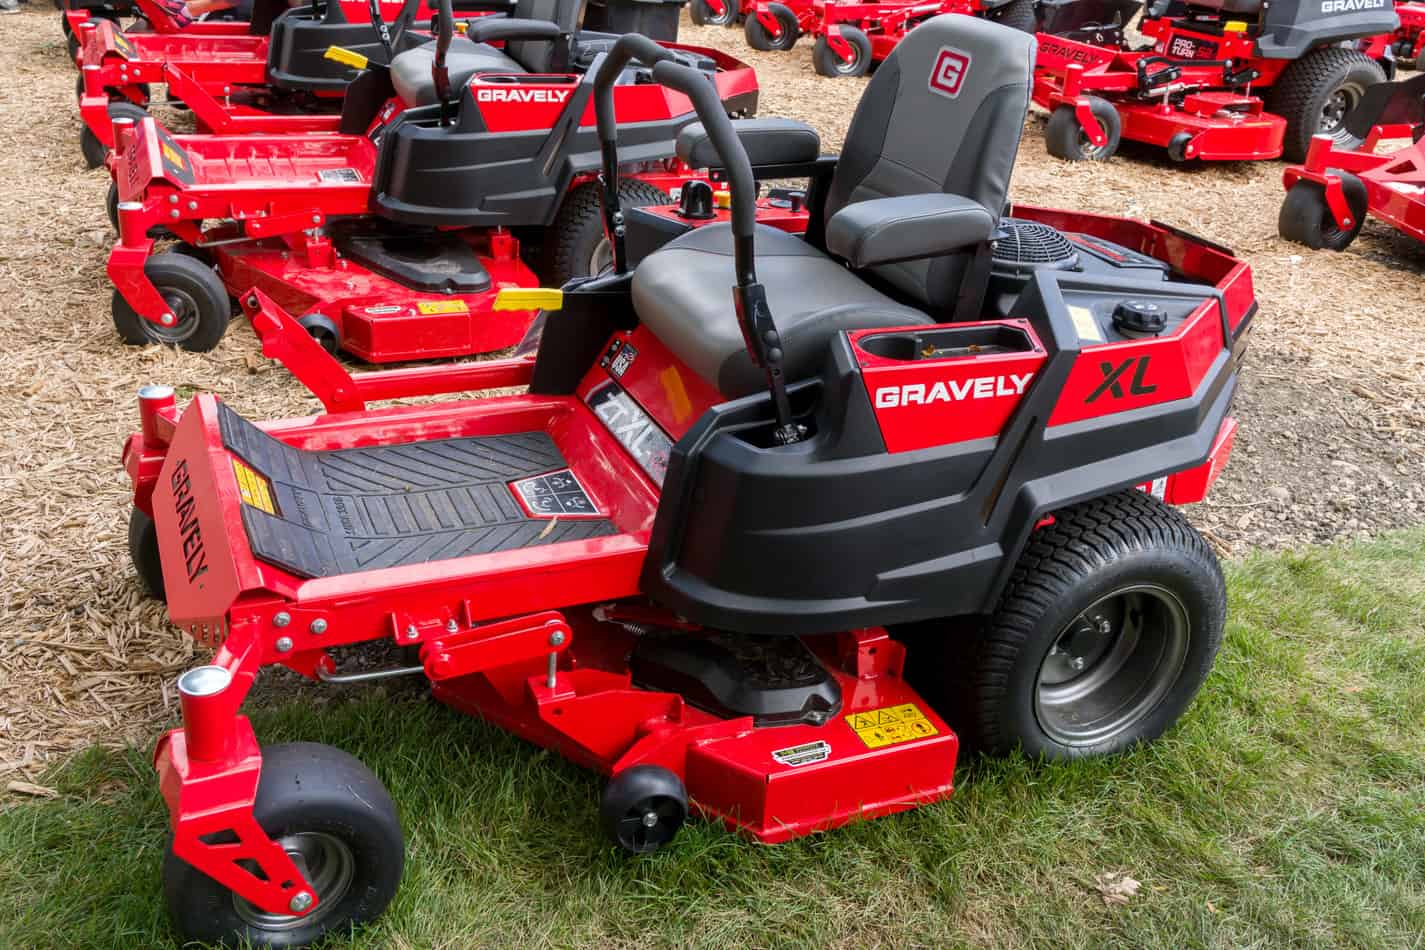 How to Buy a Used Zero Turn Mower at a Low Price